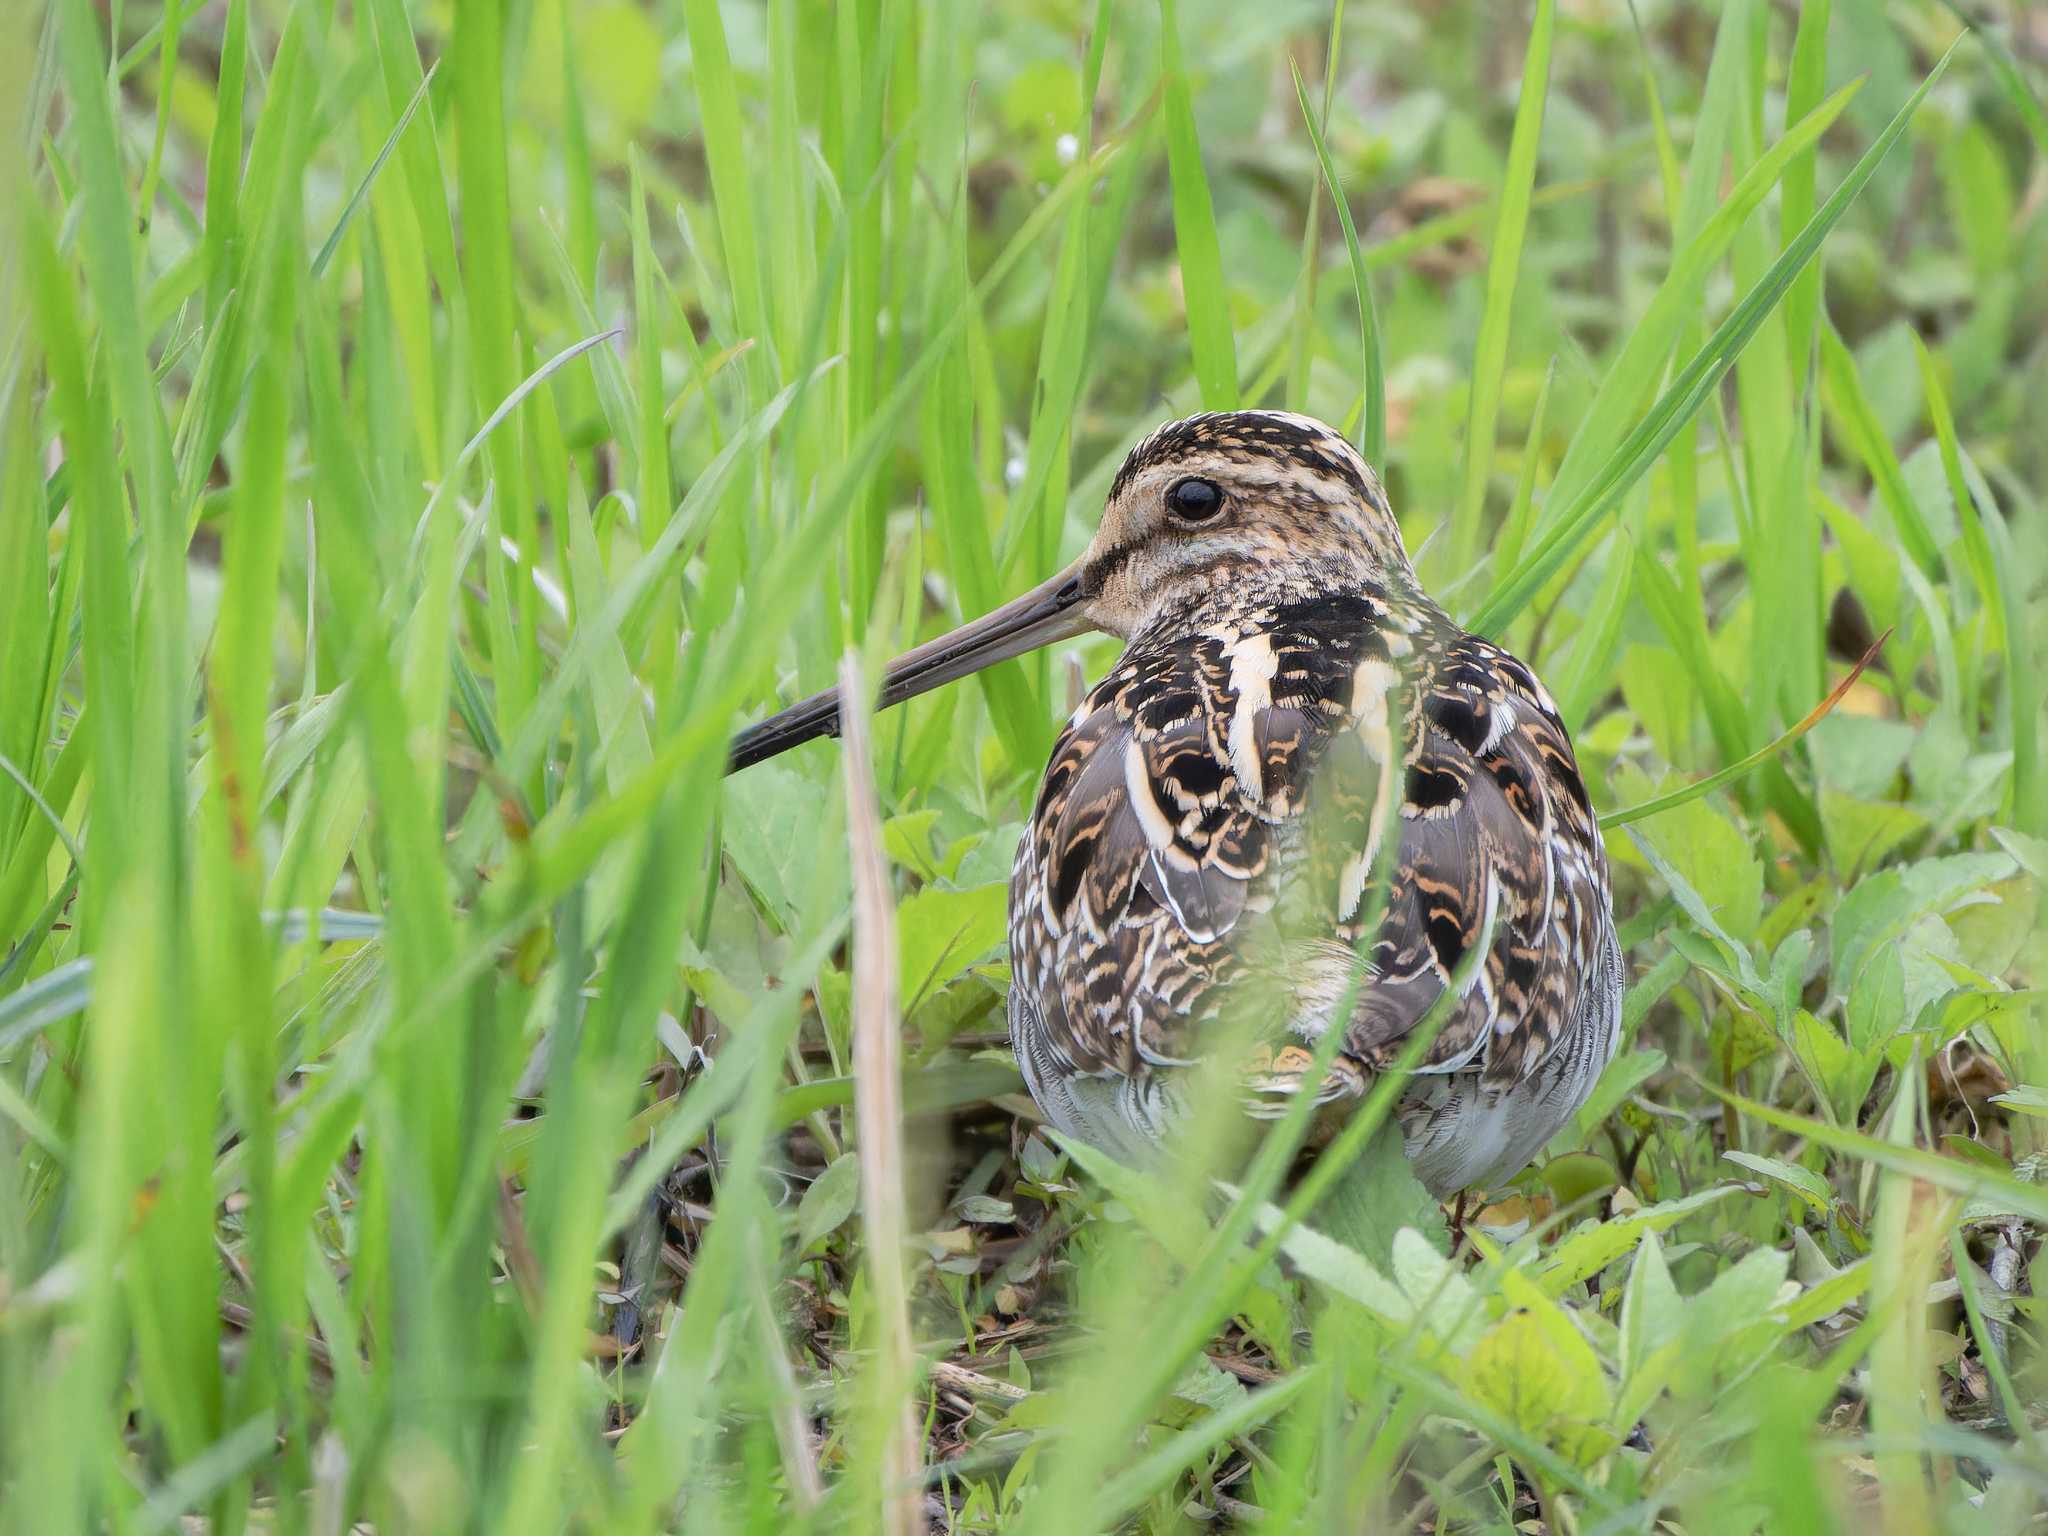 Photo of Common Snipe at 長崎県 by ここは長崎